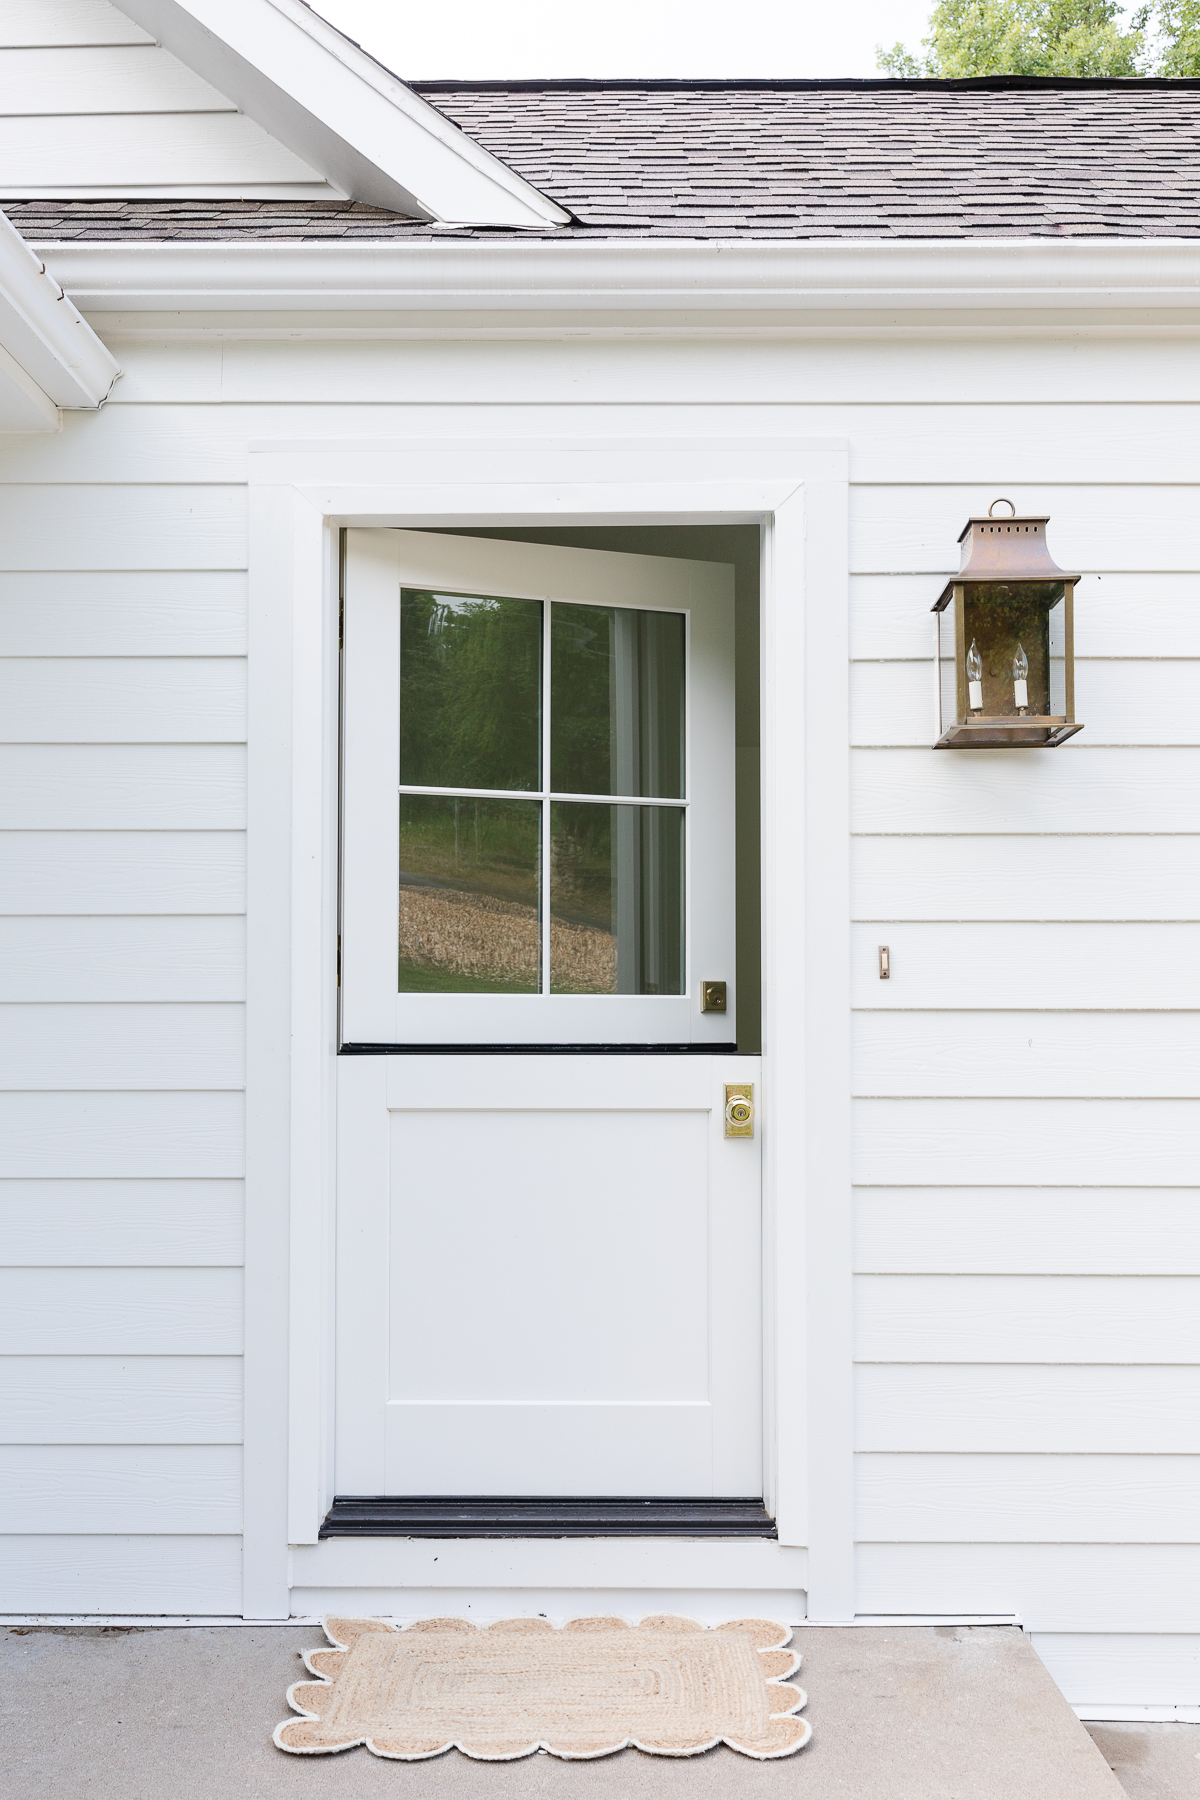 A white Dutch door on a white shingled cottage.